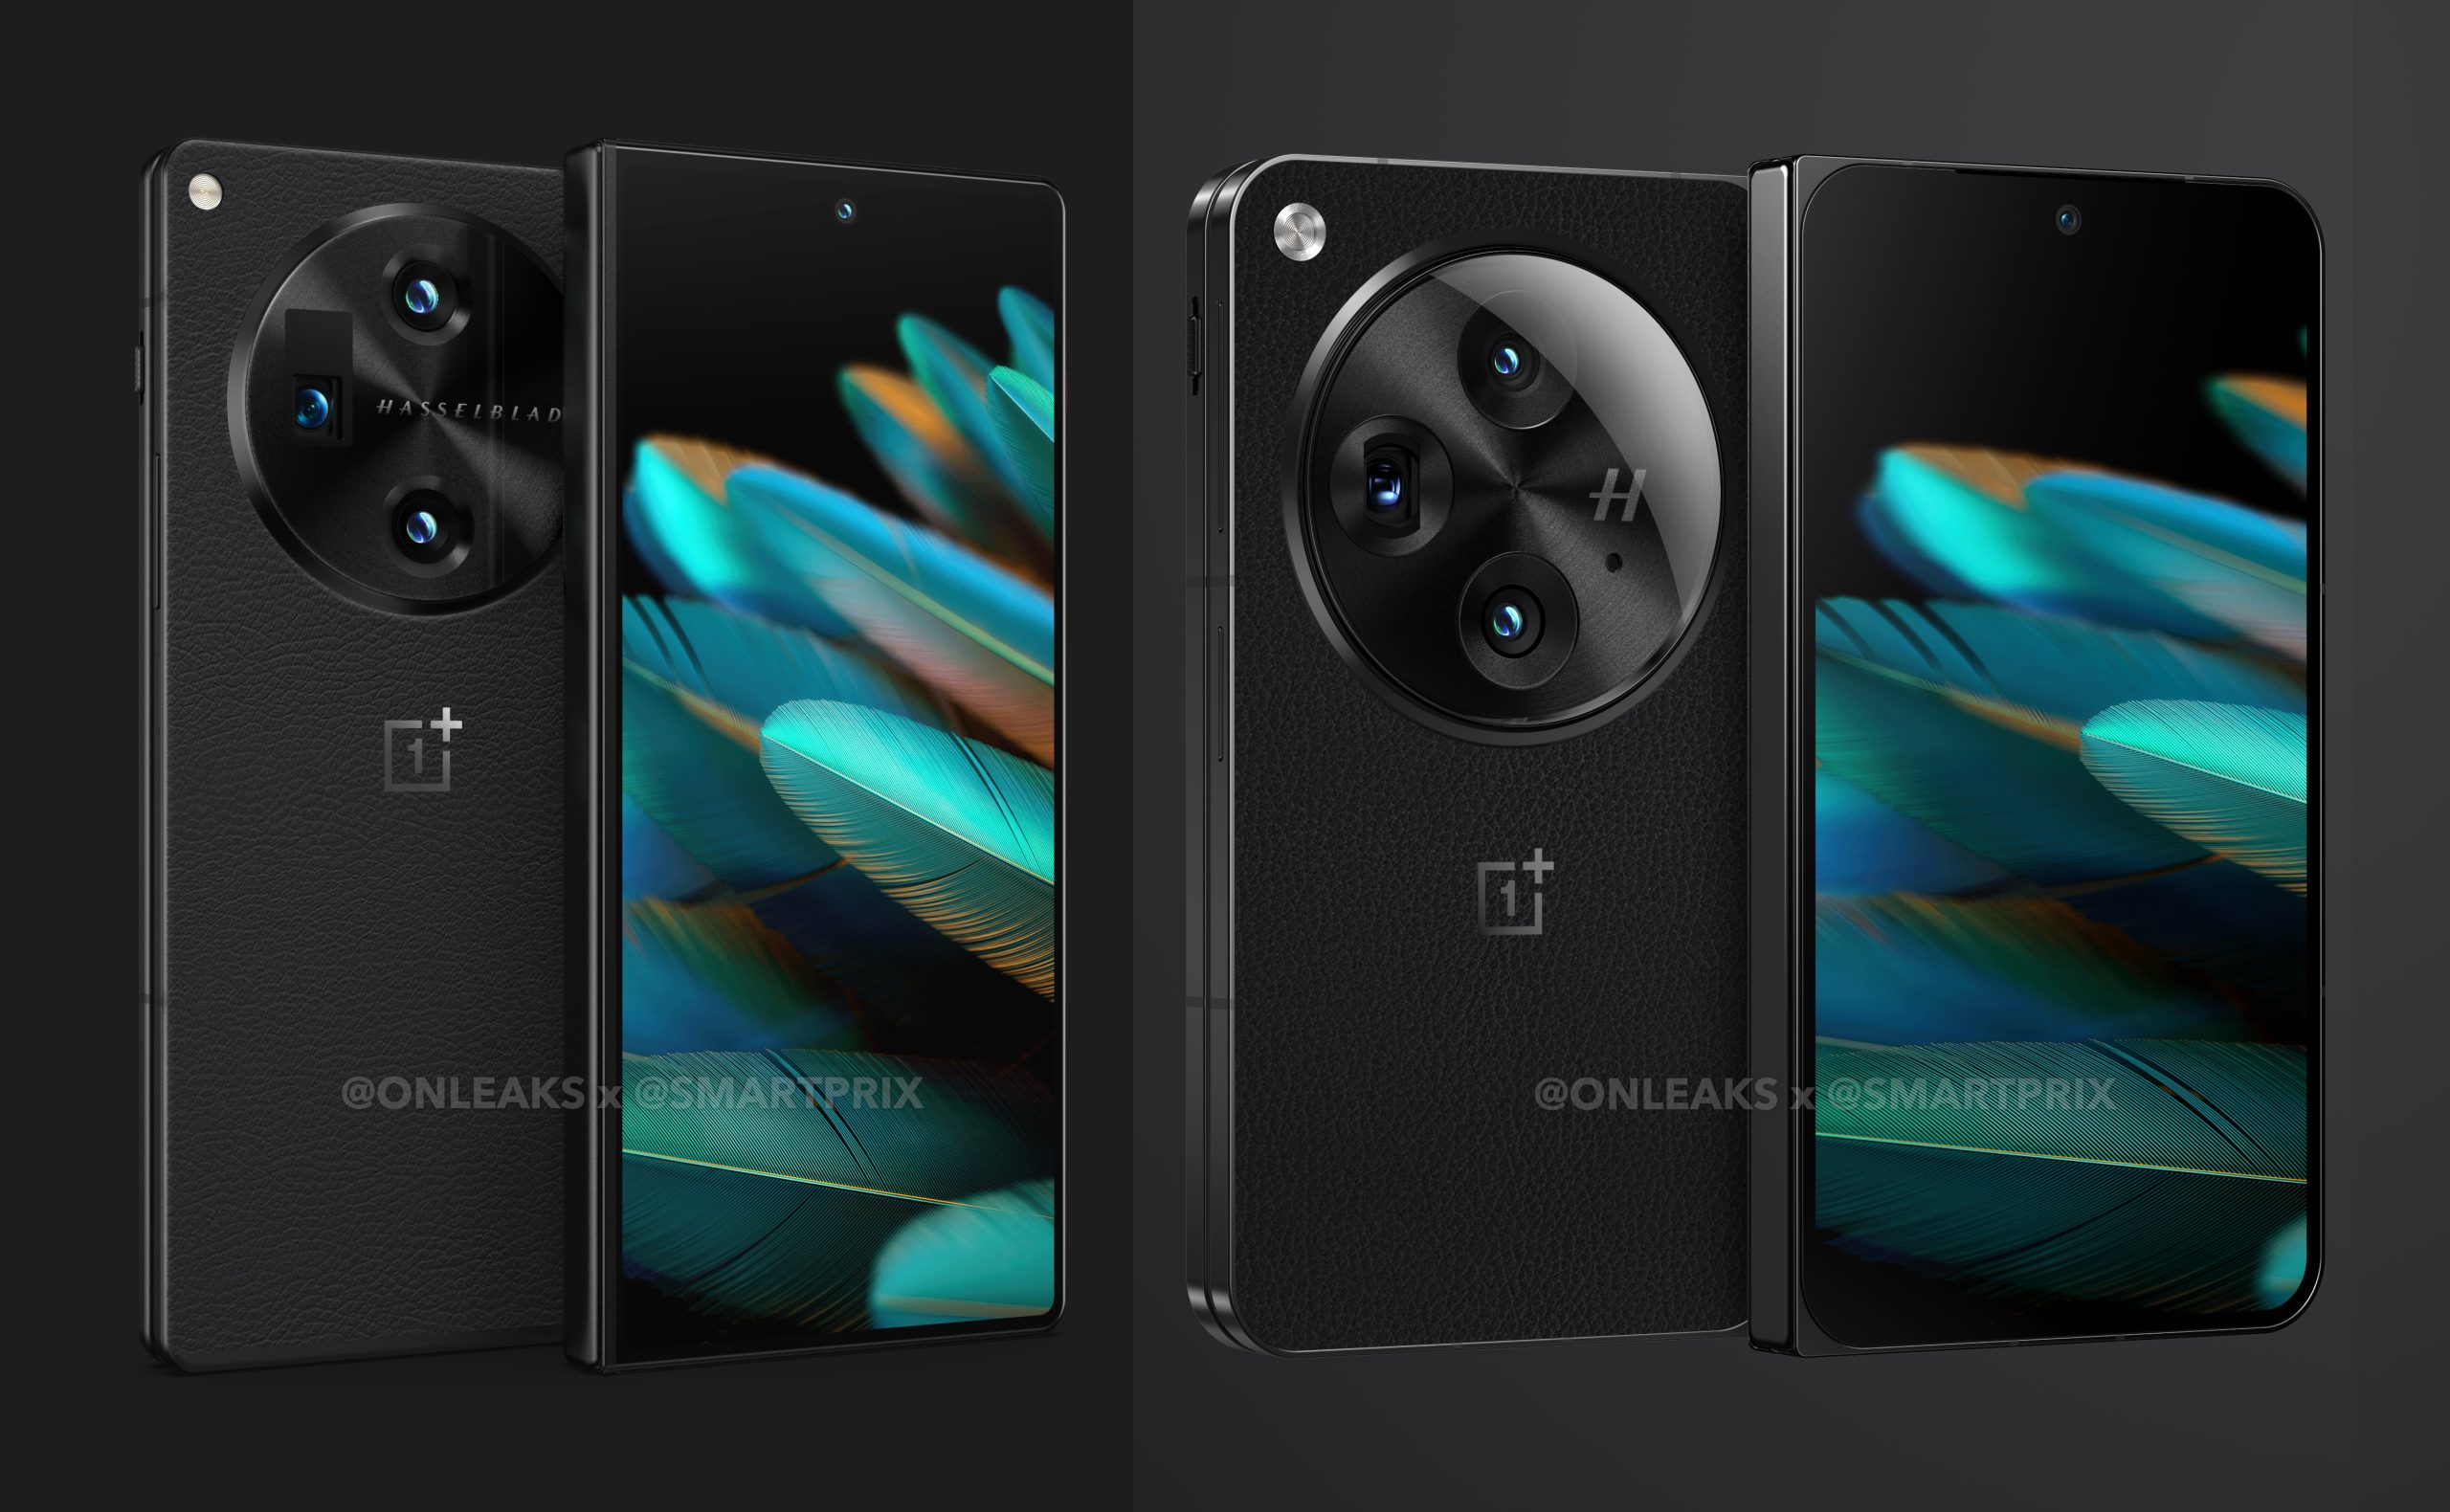 Render of the OnePlus Open prototype unit vs. early production unit